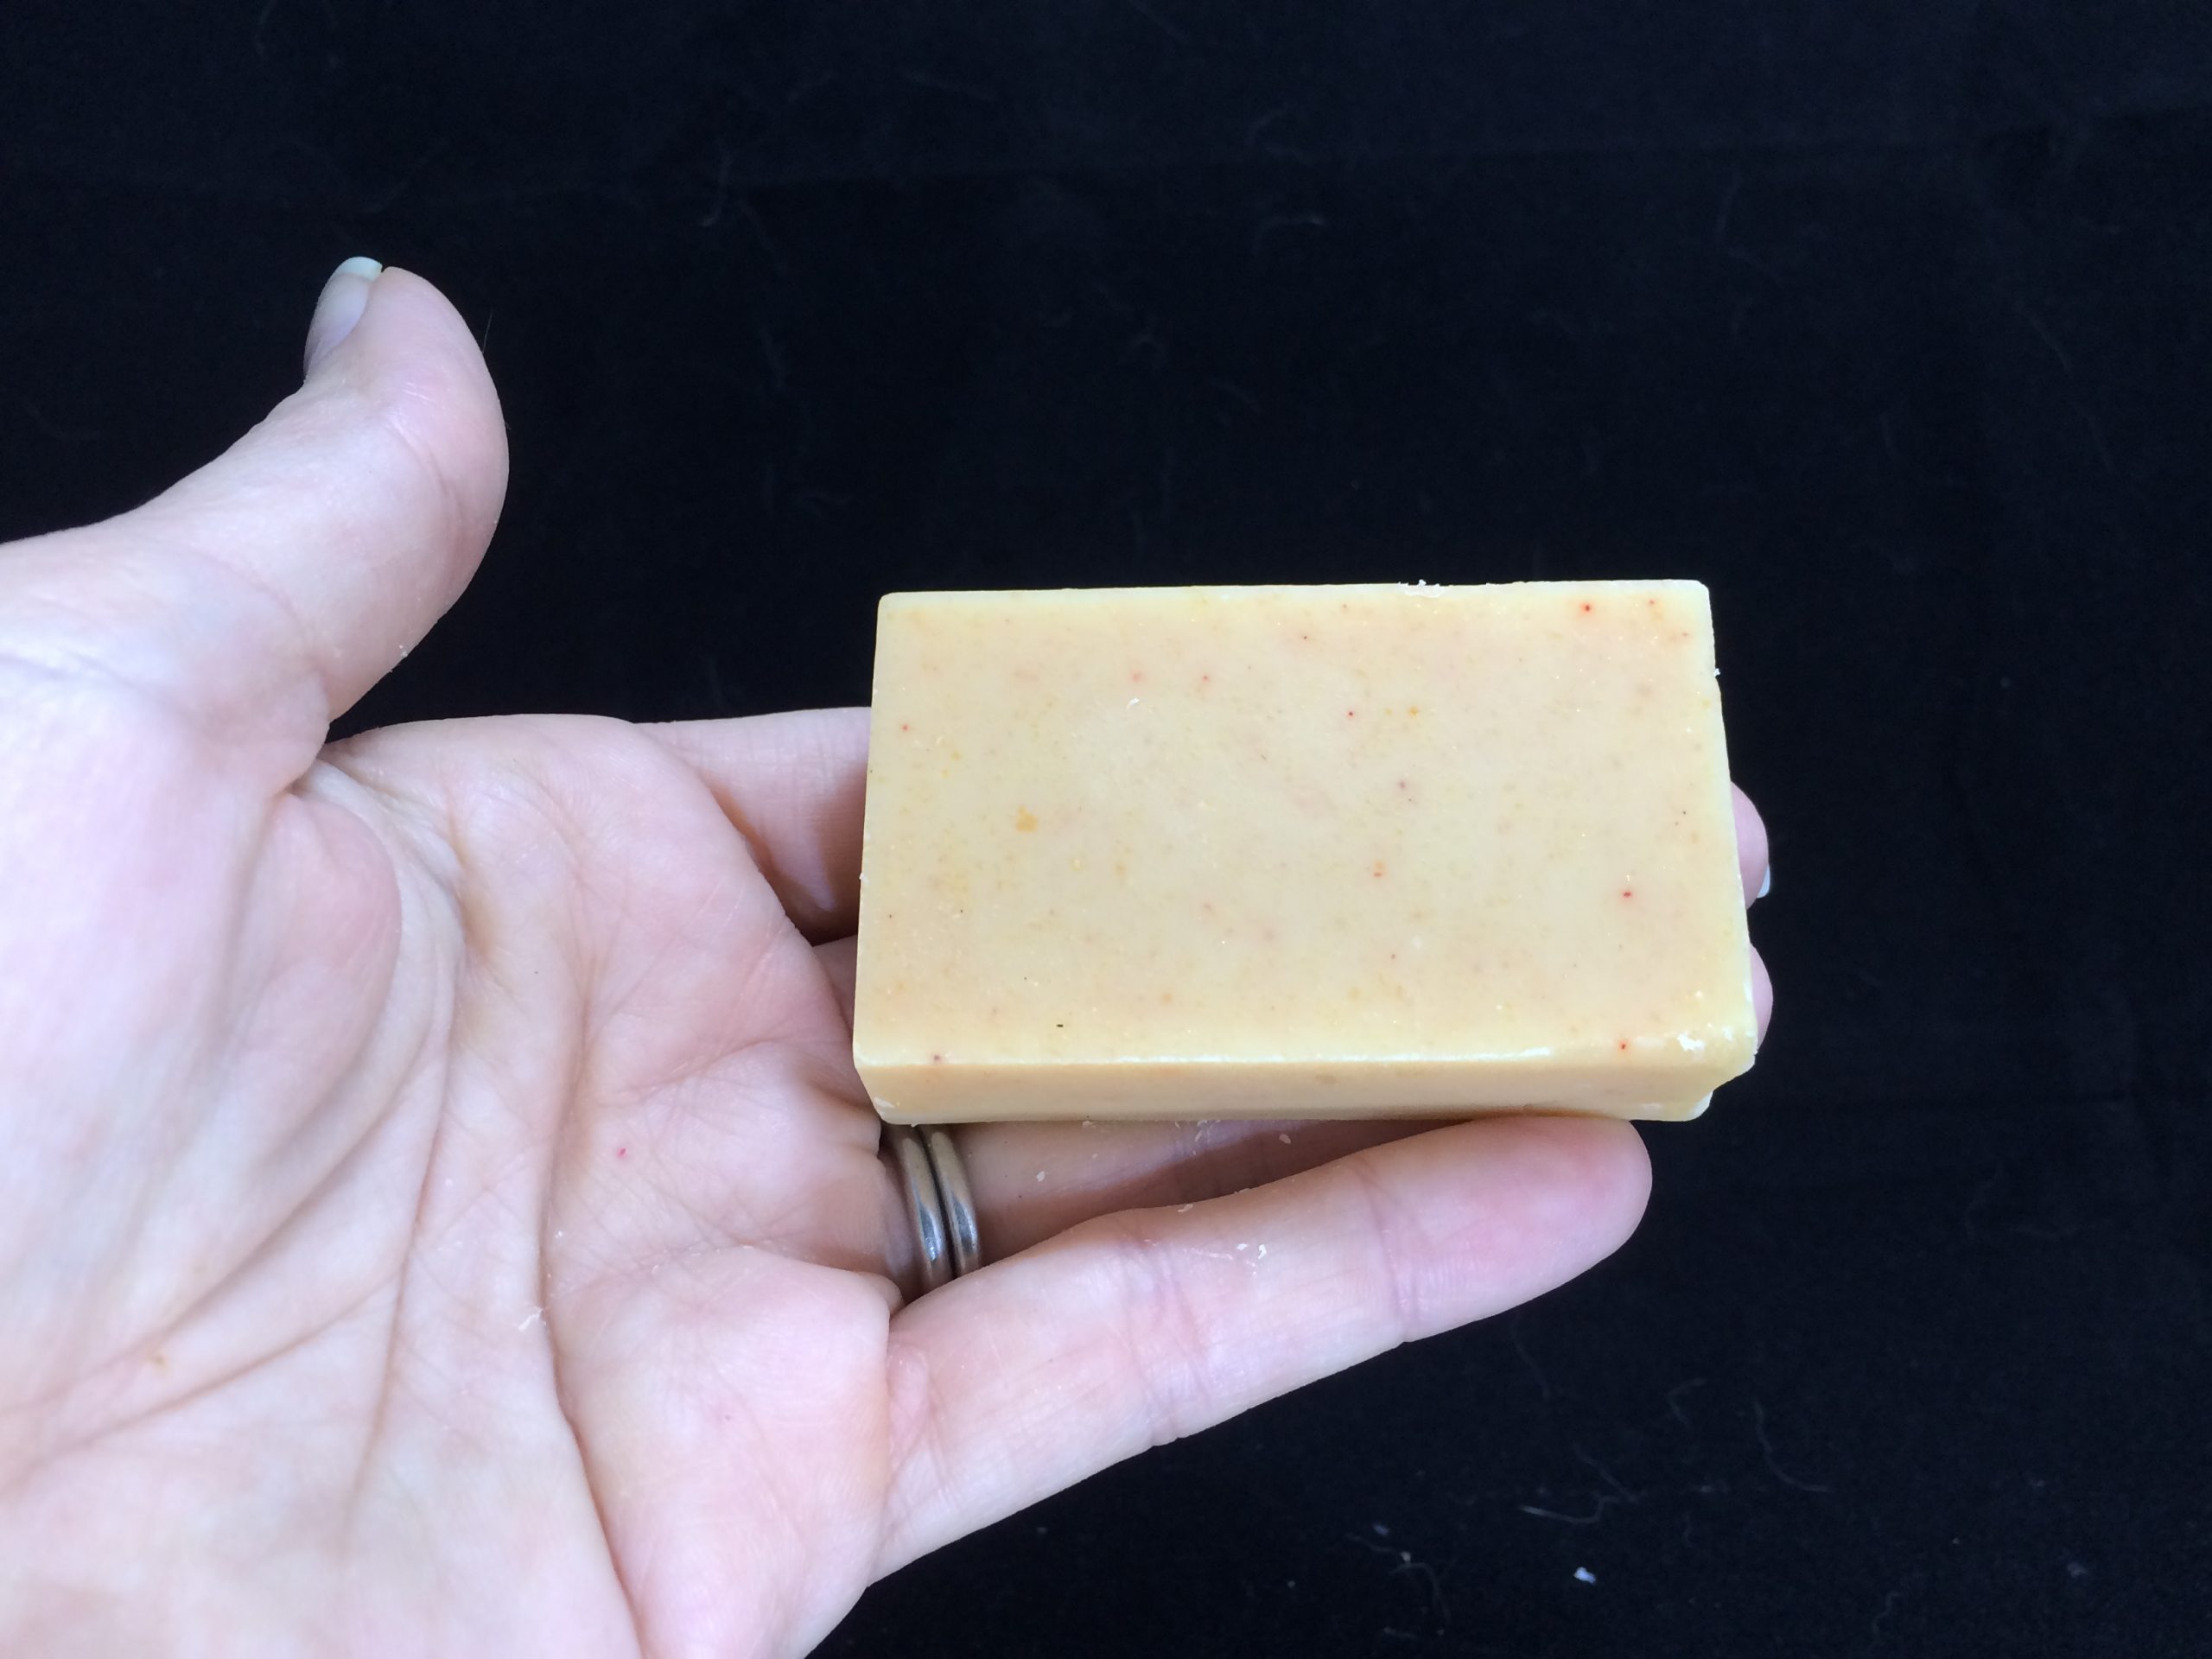 Uplifting trial size soap bar